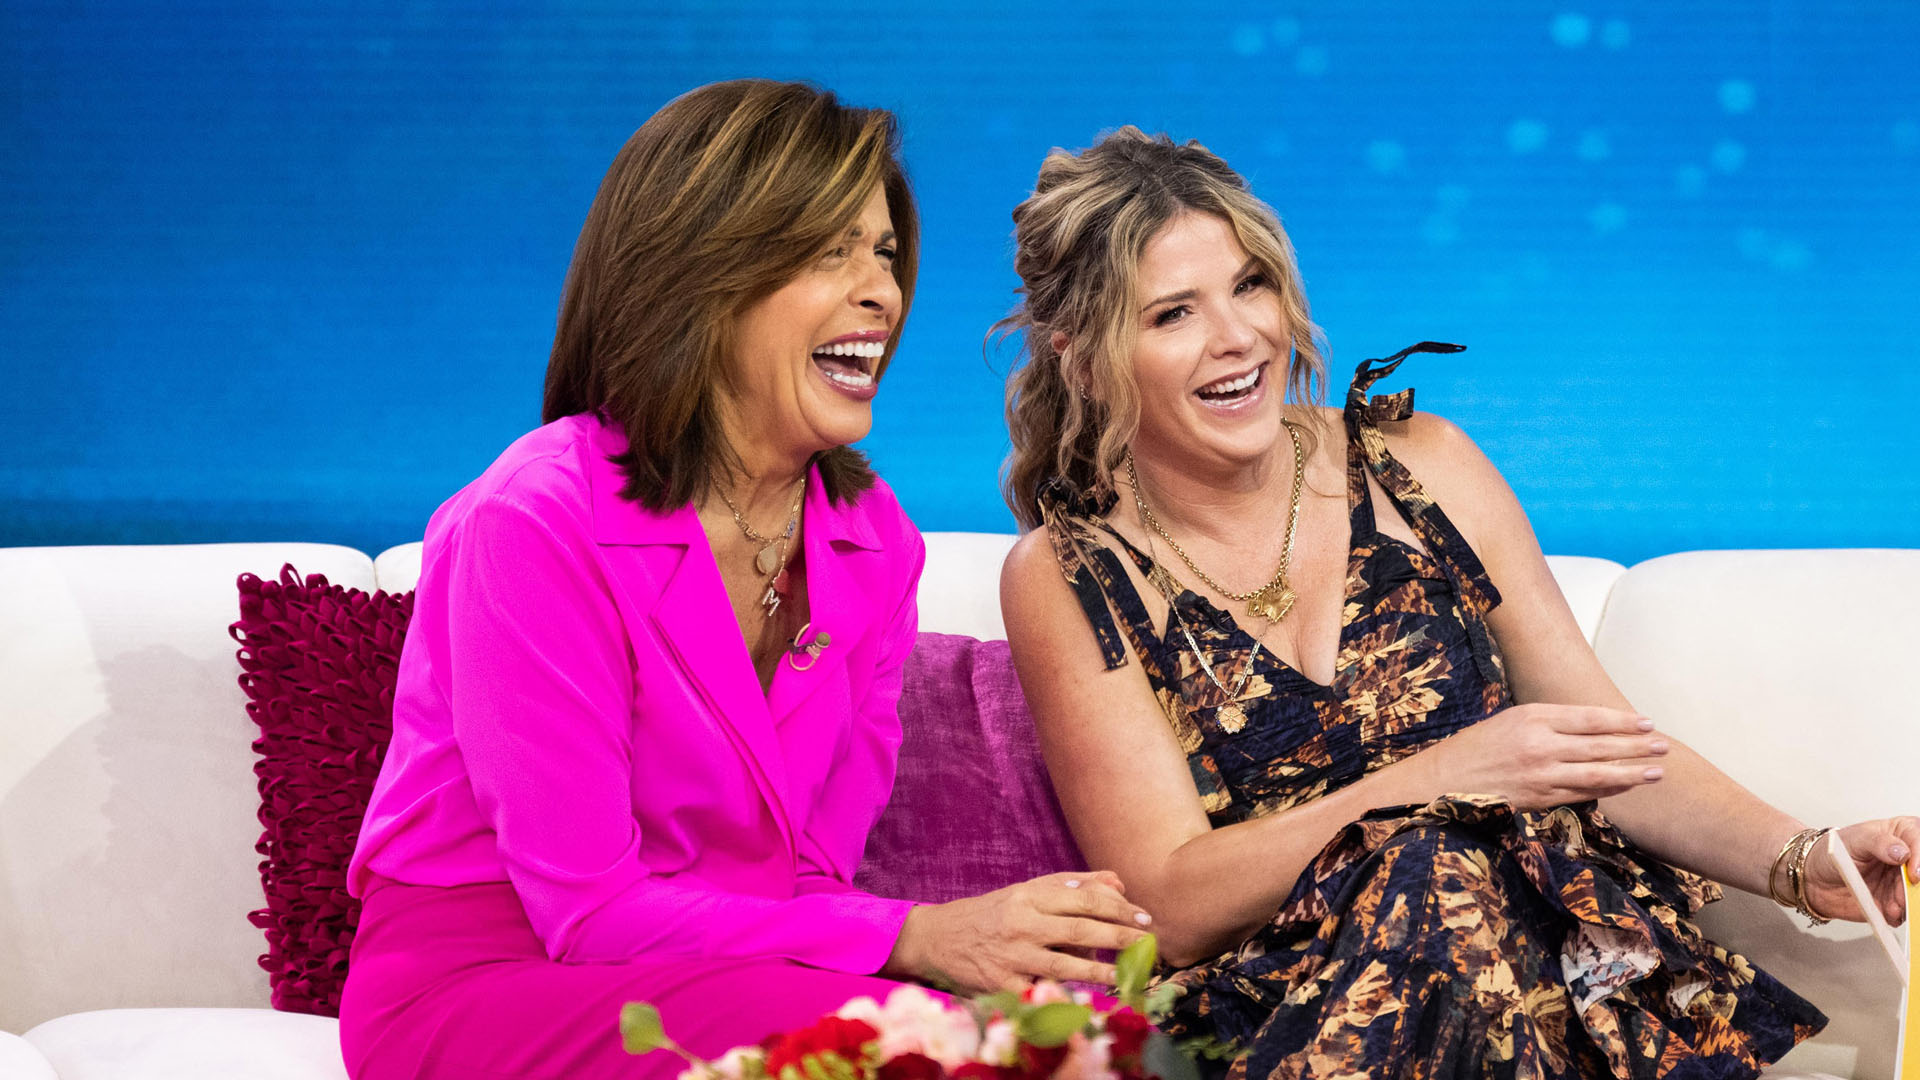 Fans criticize Jenna Bush Hager, Hoda Kotb and their show today for not warning of major filming changes.